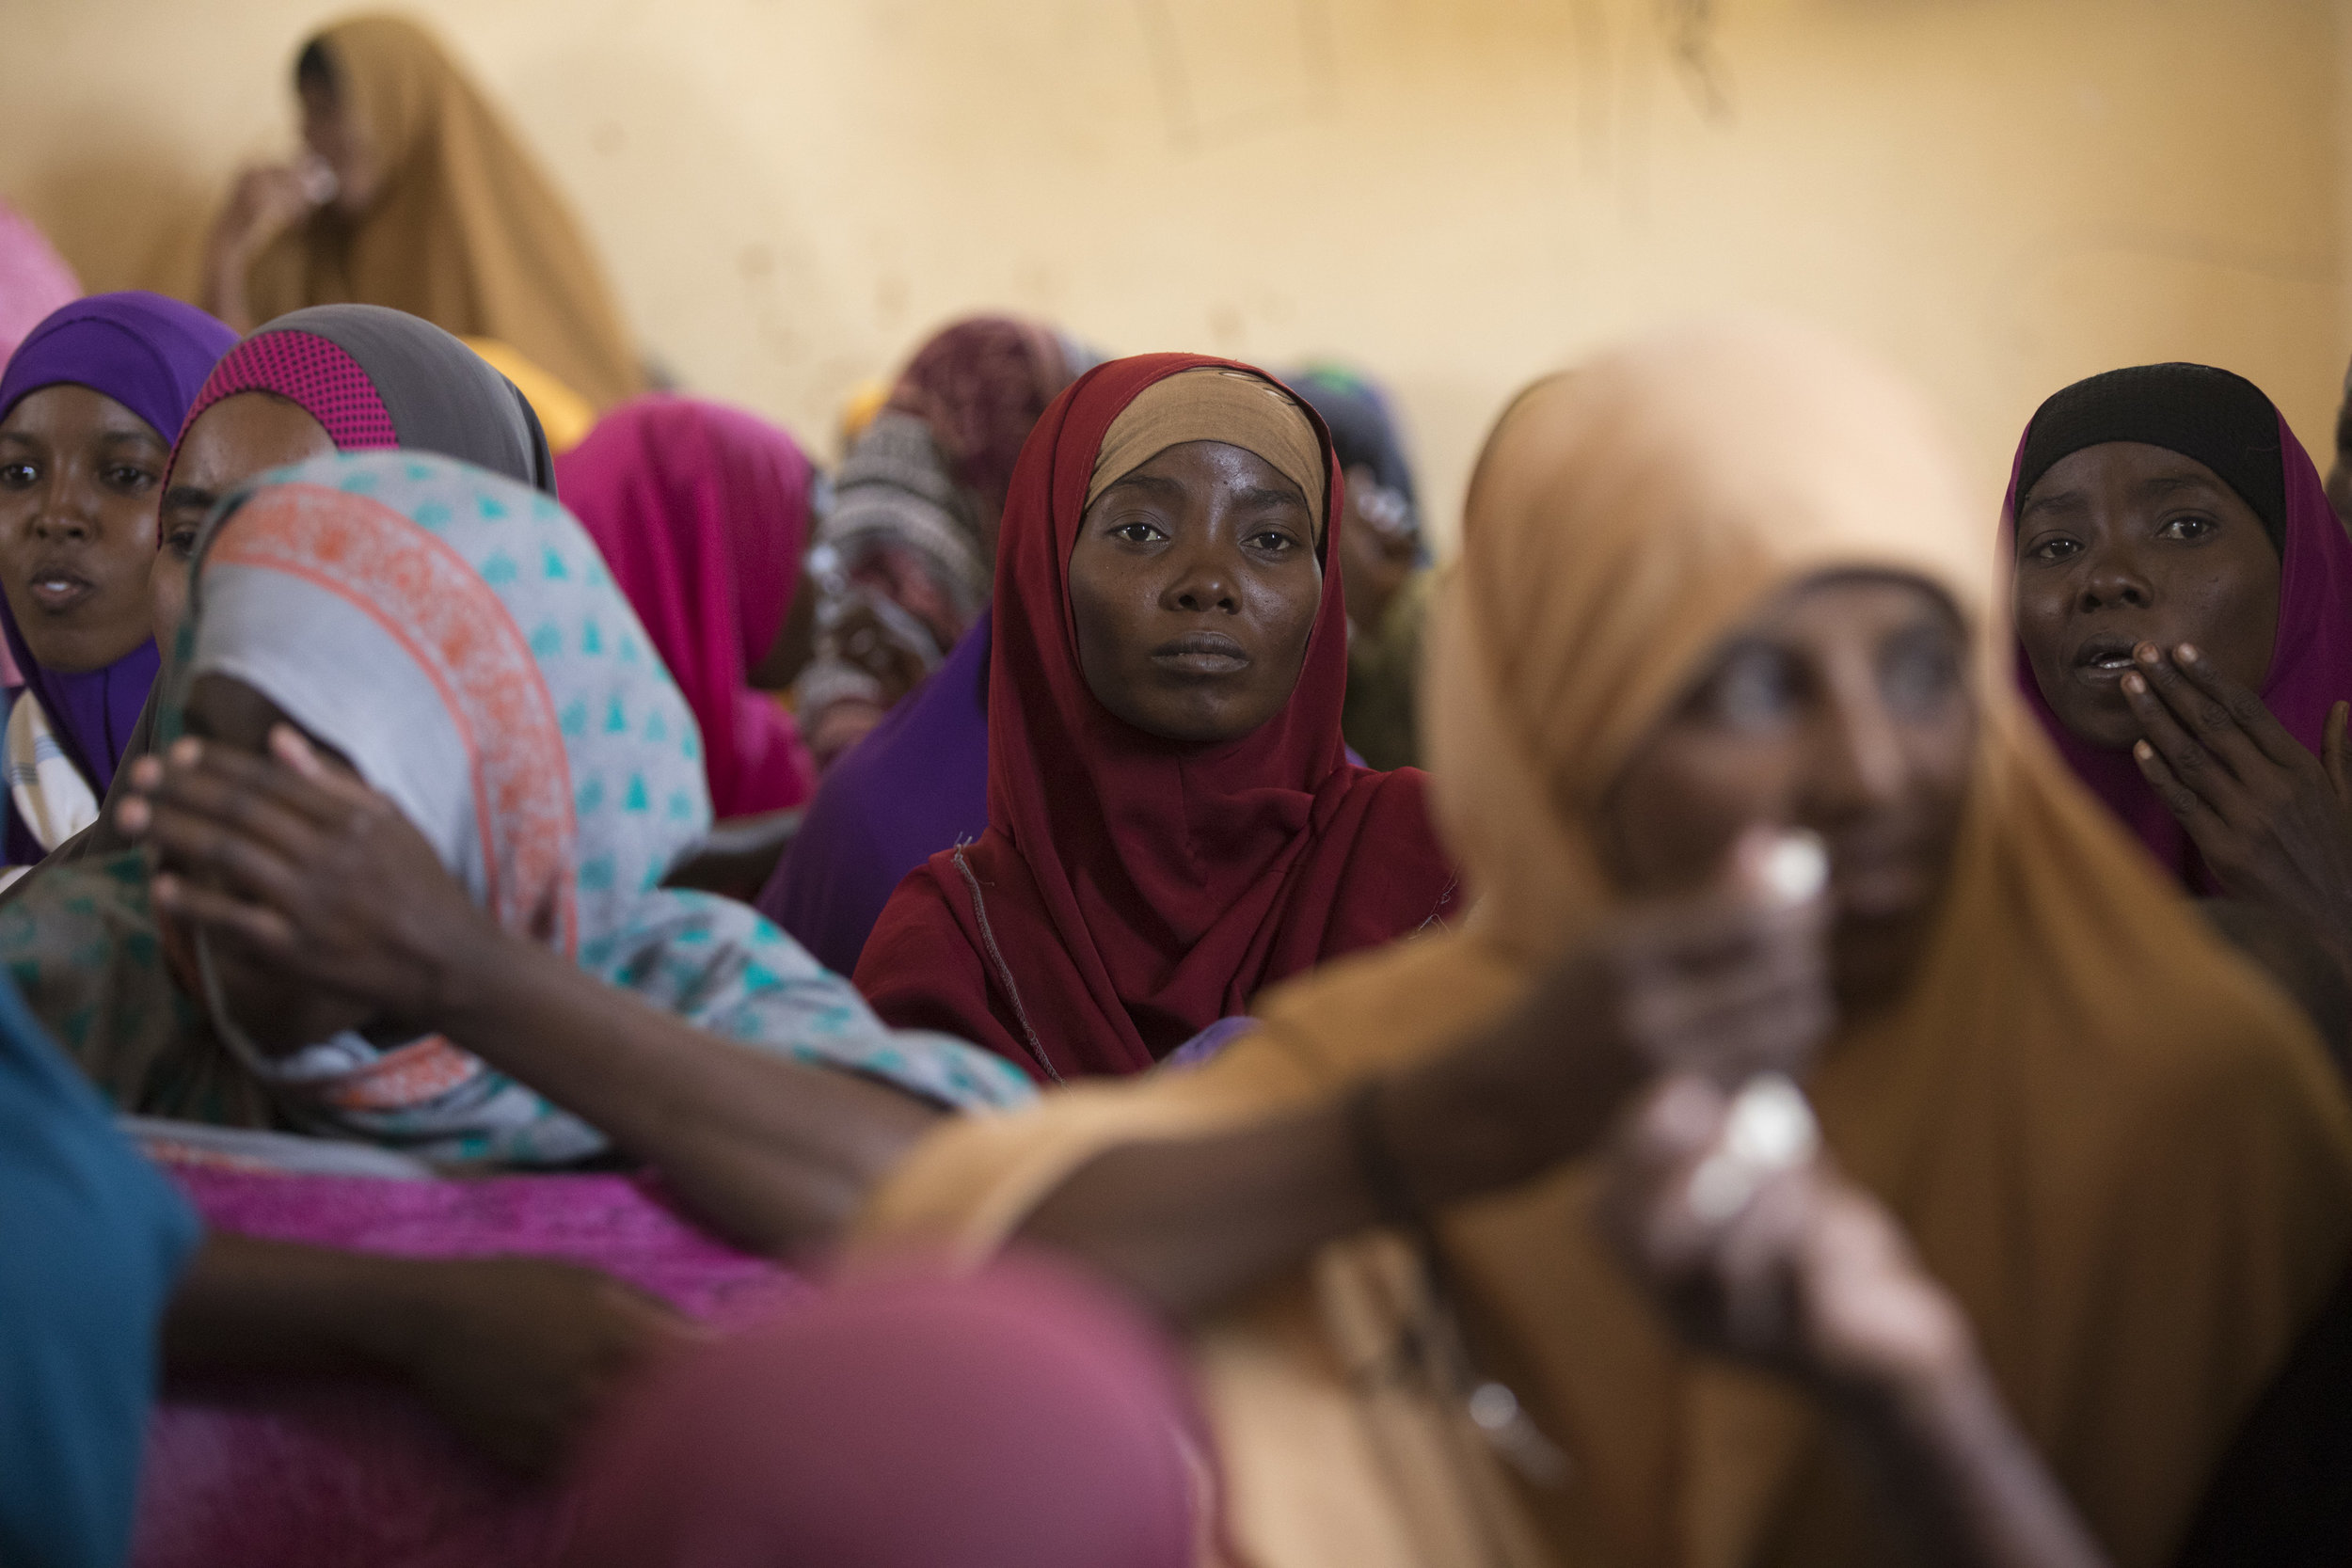  A woman sits in a meeting for gender based violence outreach in Melkadida refugee camp in the Somali region of Ethiopia on 19 Dec 2017. AFP Photo / Zacharias Abubeker 